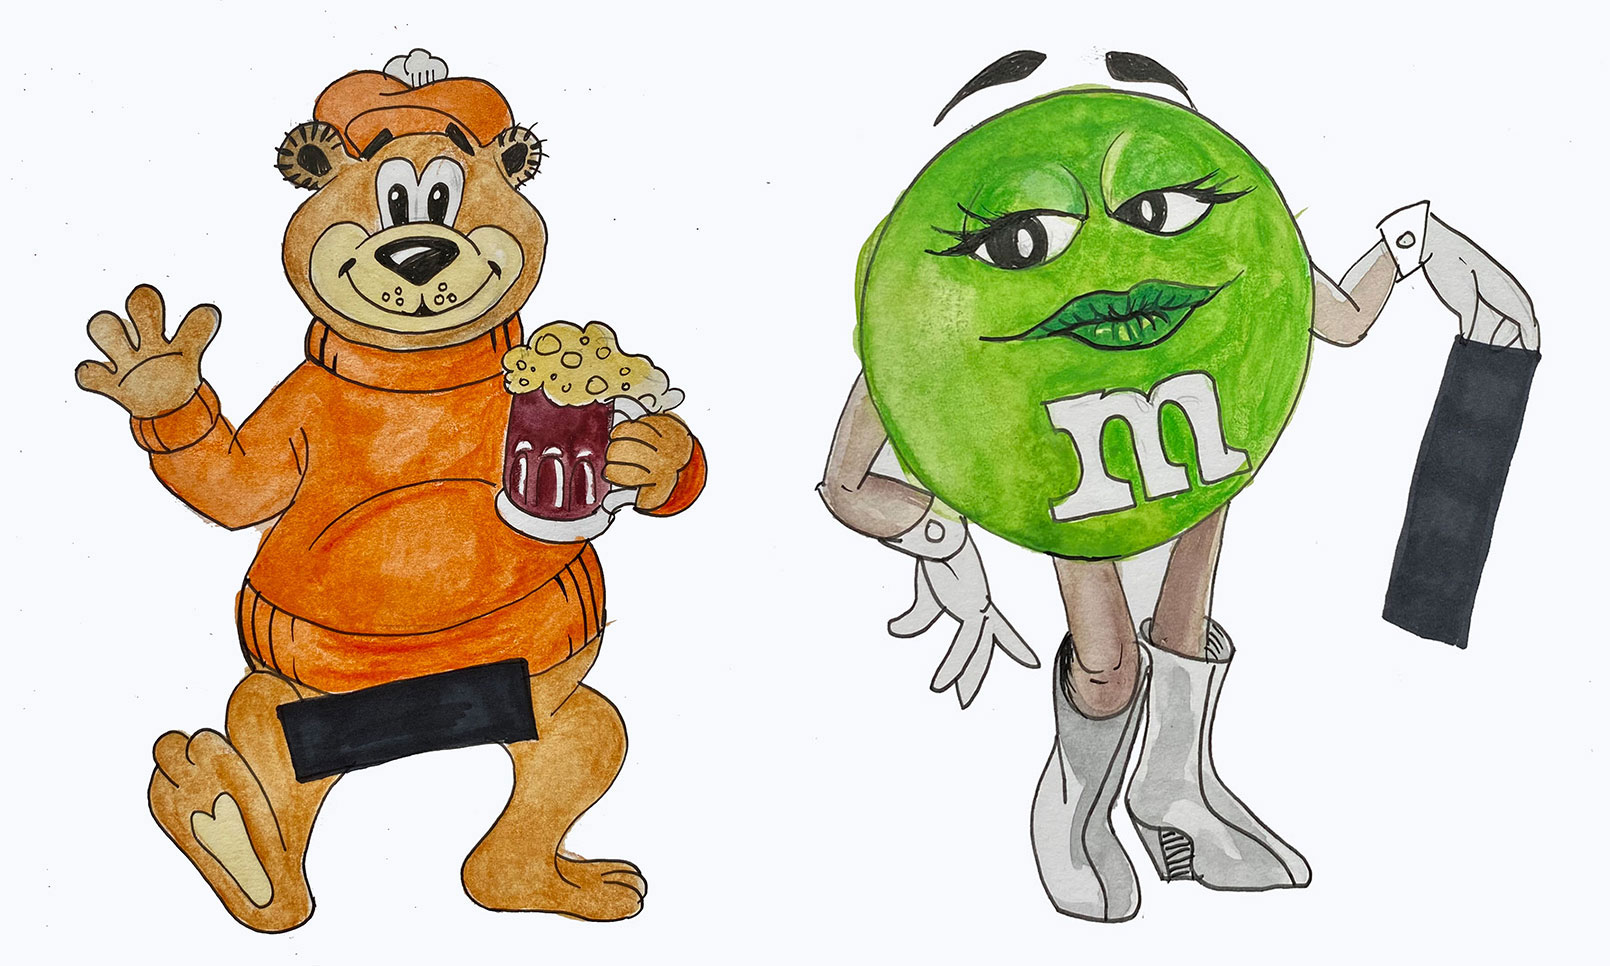 On the left, an illustration of a green M&M candy mascot wearing white go-go boots. On the right, an illustration of a the A&W root beer bear wearing an orange sweater, an orange tuque and holding a mug of root beer. His groin is covered with a black censorship bar.